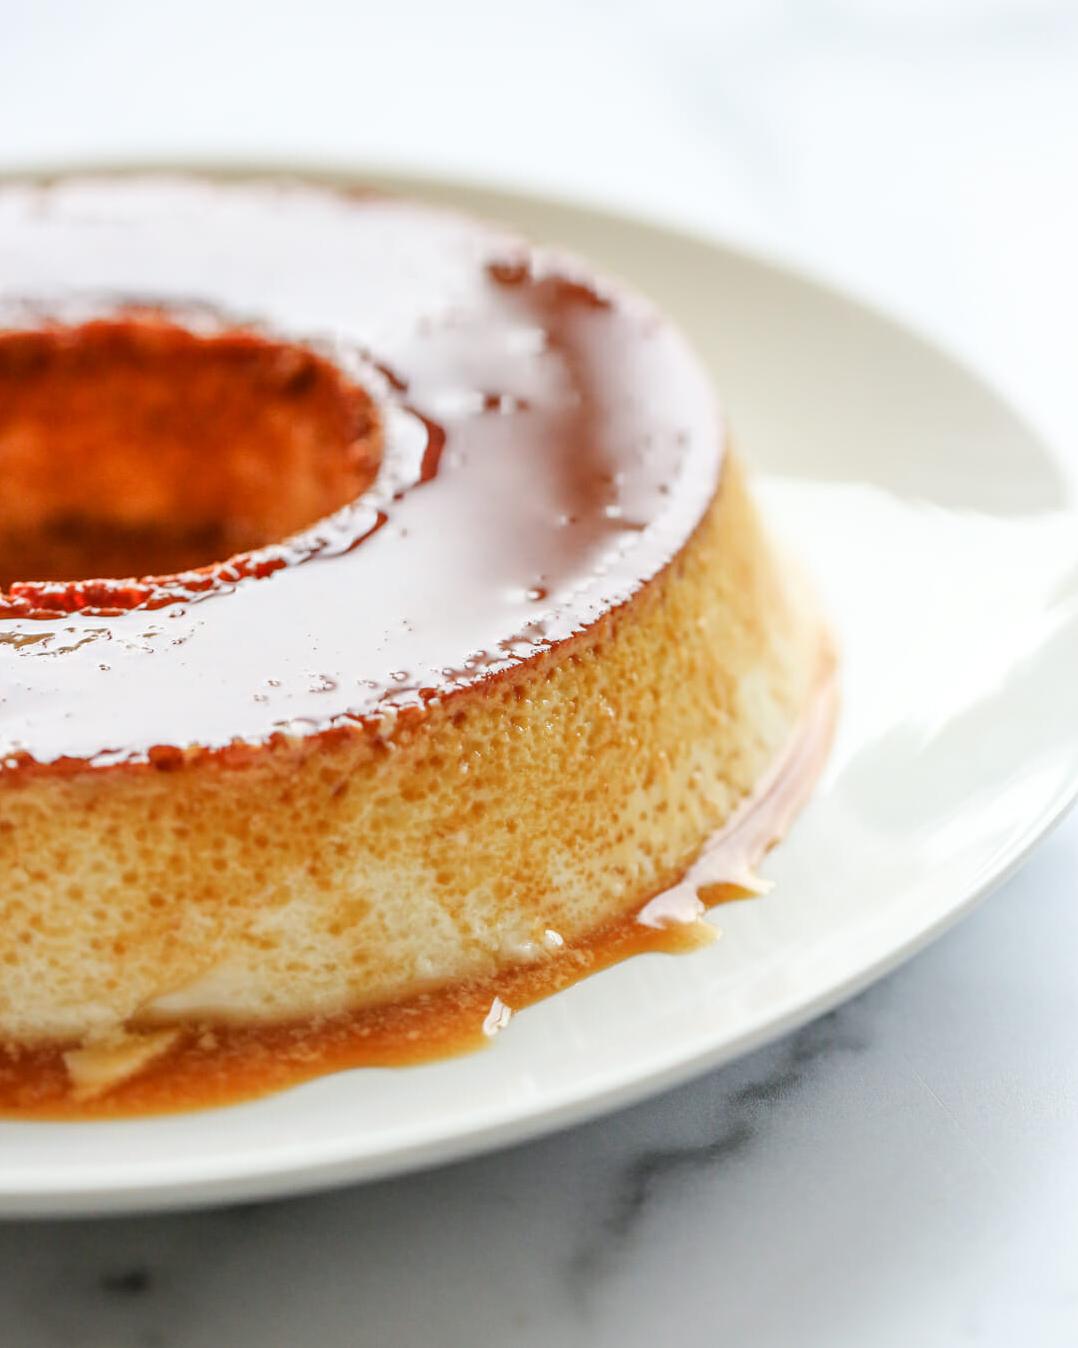  You haven't lived until you've tried this luscious Brazilian Flan - proof that simple desserts can be show-stoppers.